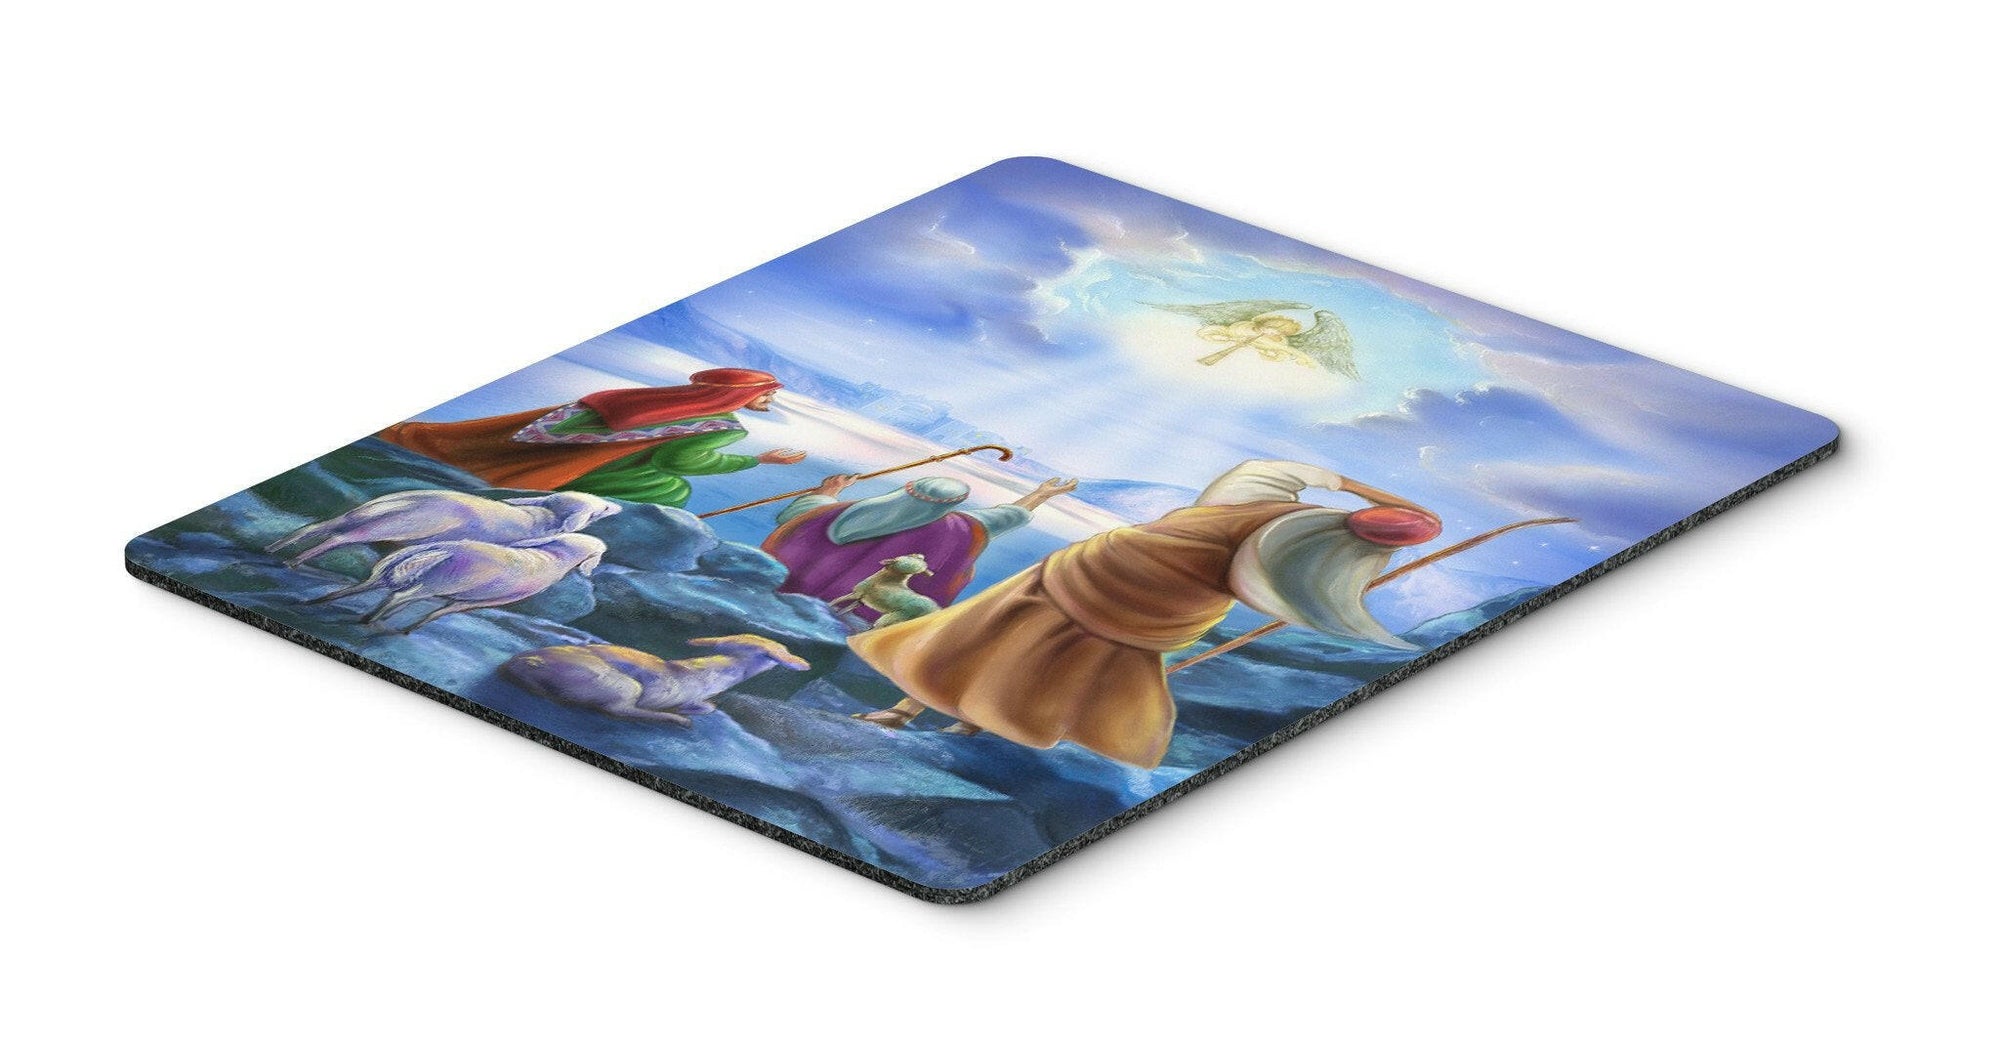 The Shepherds and Angels Appeared Mouse Pad, Hot Pad or Trivet APH5468MP by Caroline's Treasures